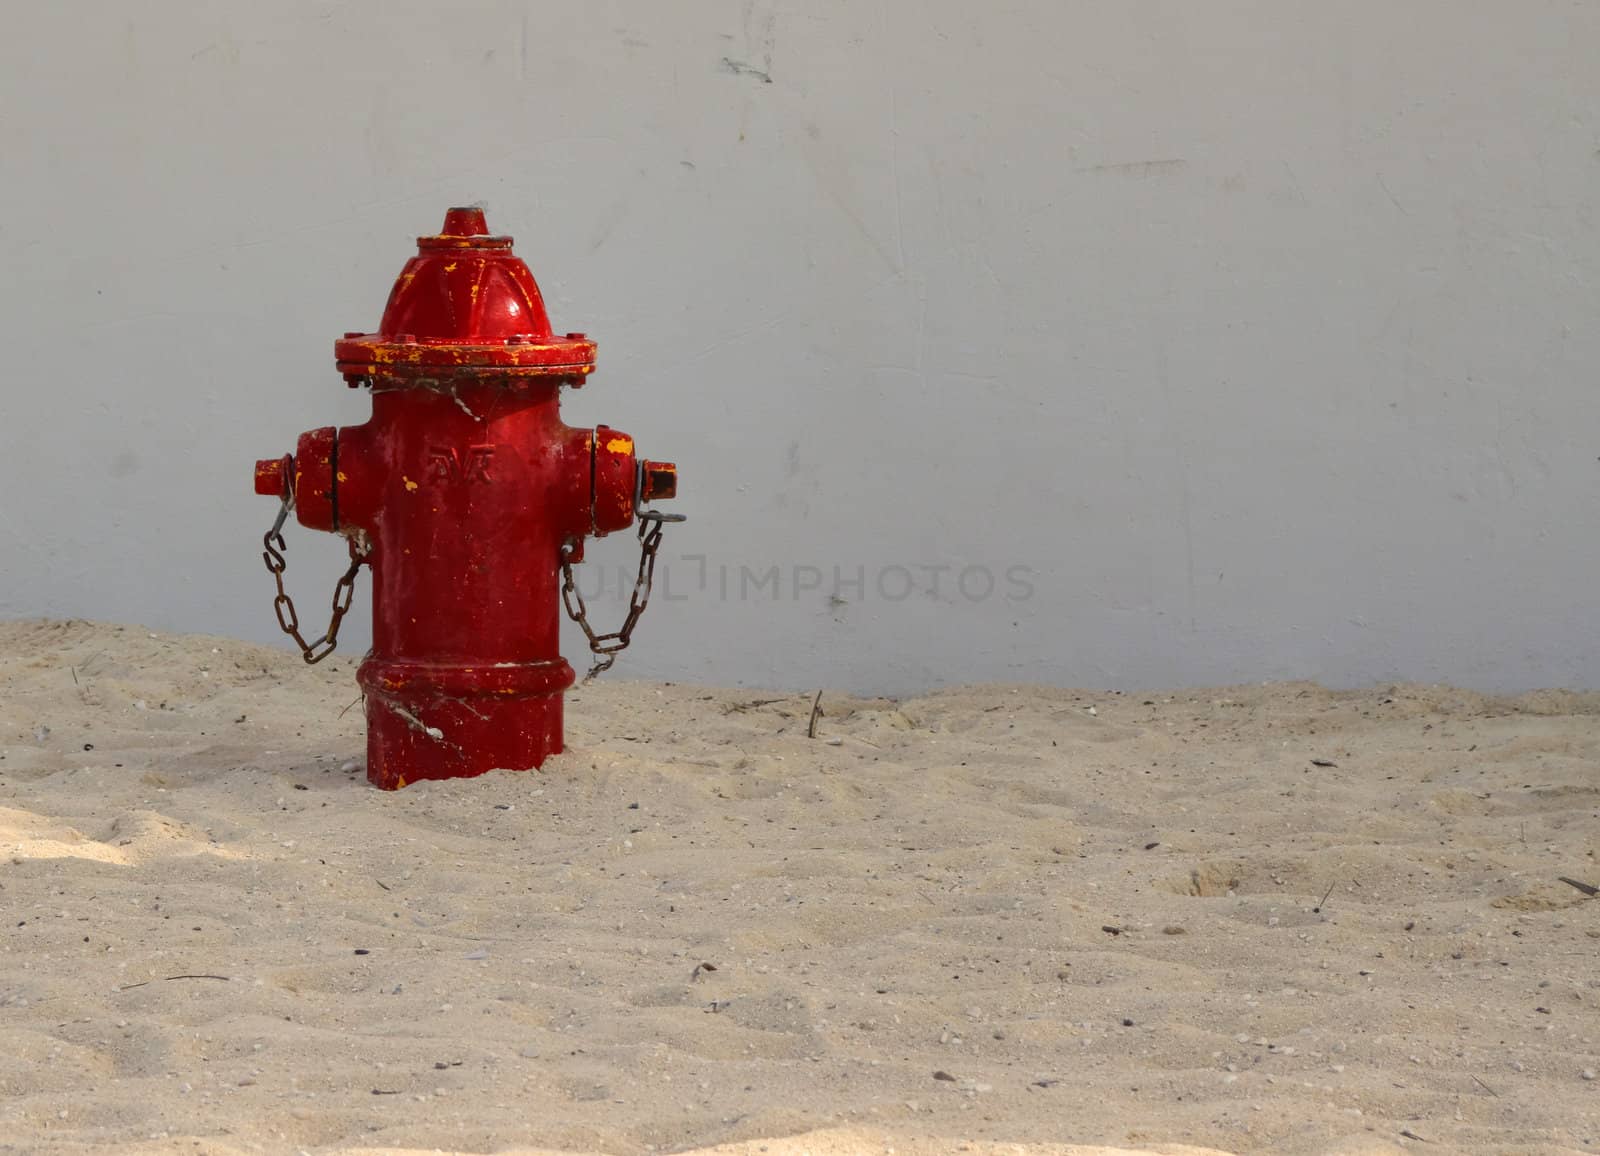 Left side view of red fire hydrant on a sandy beach